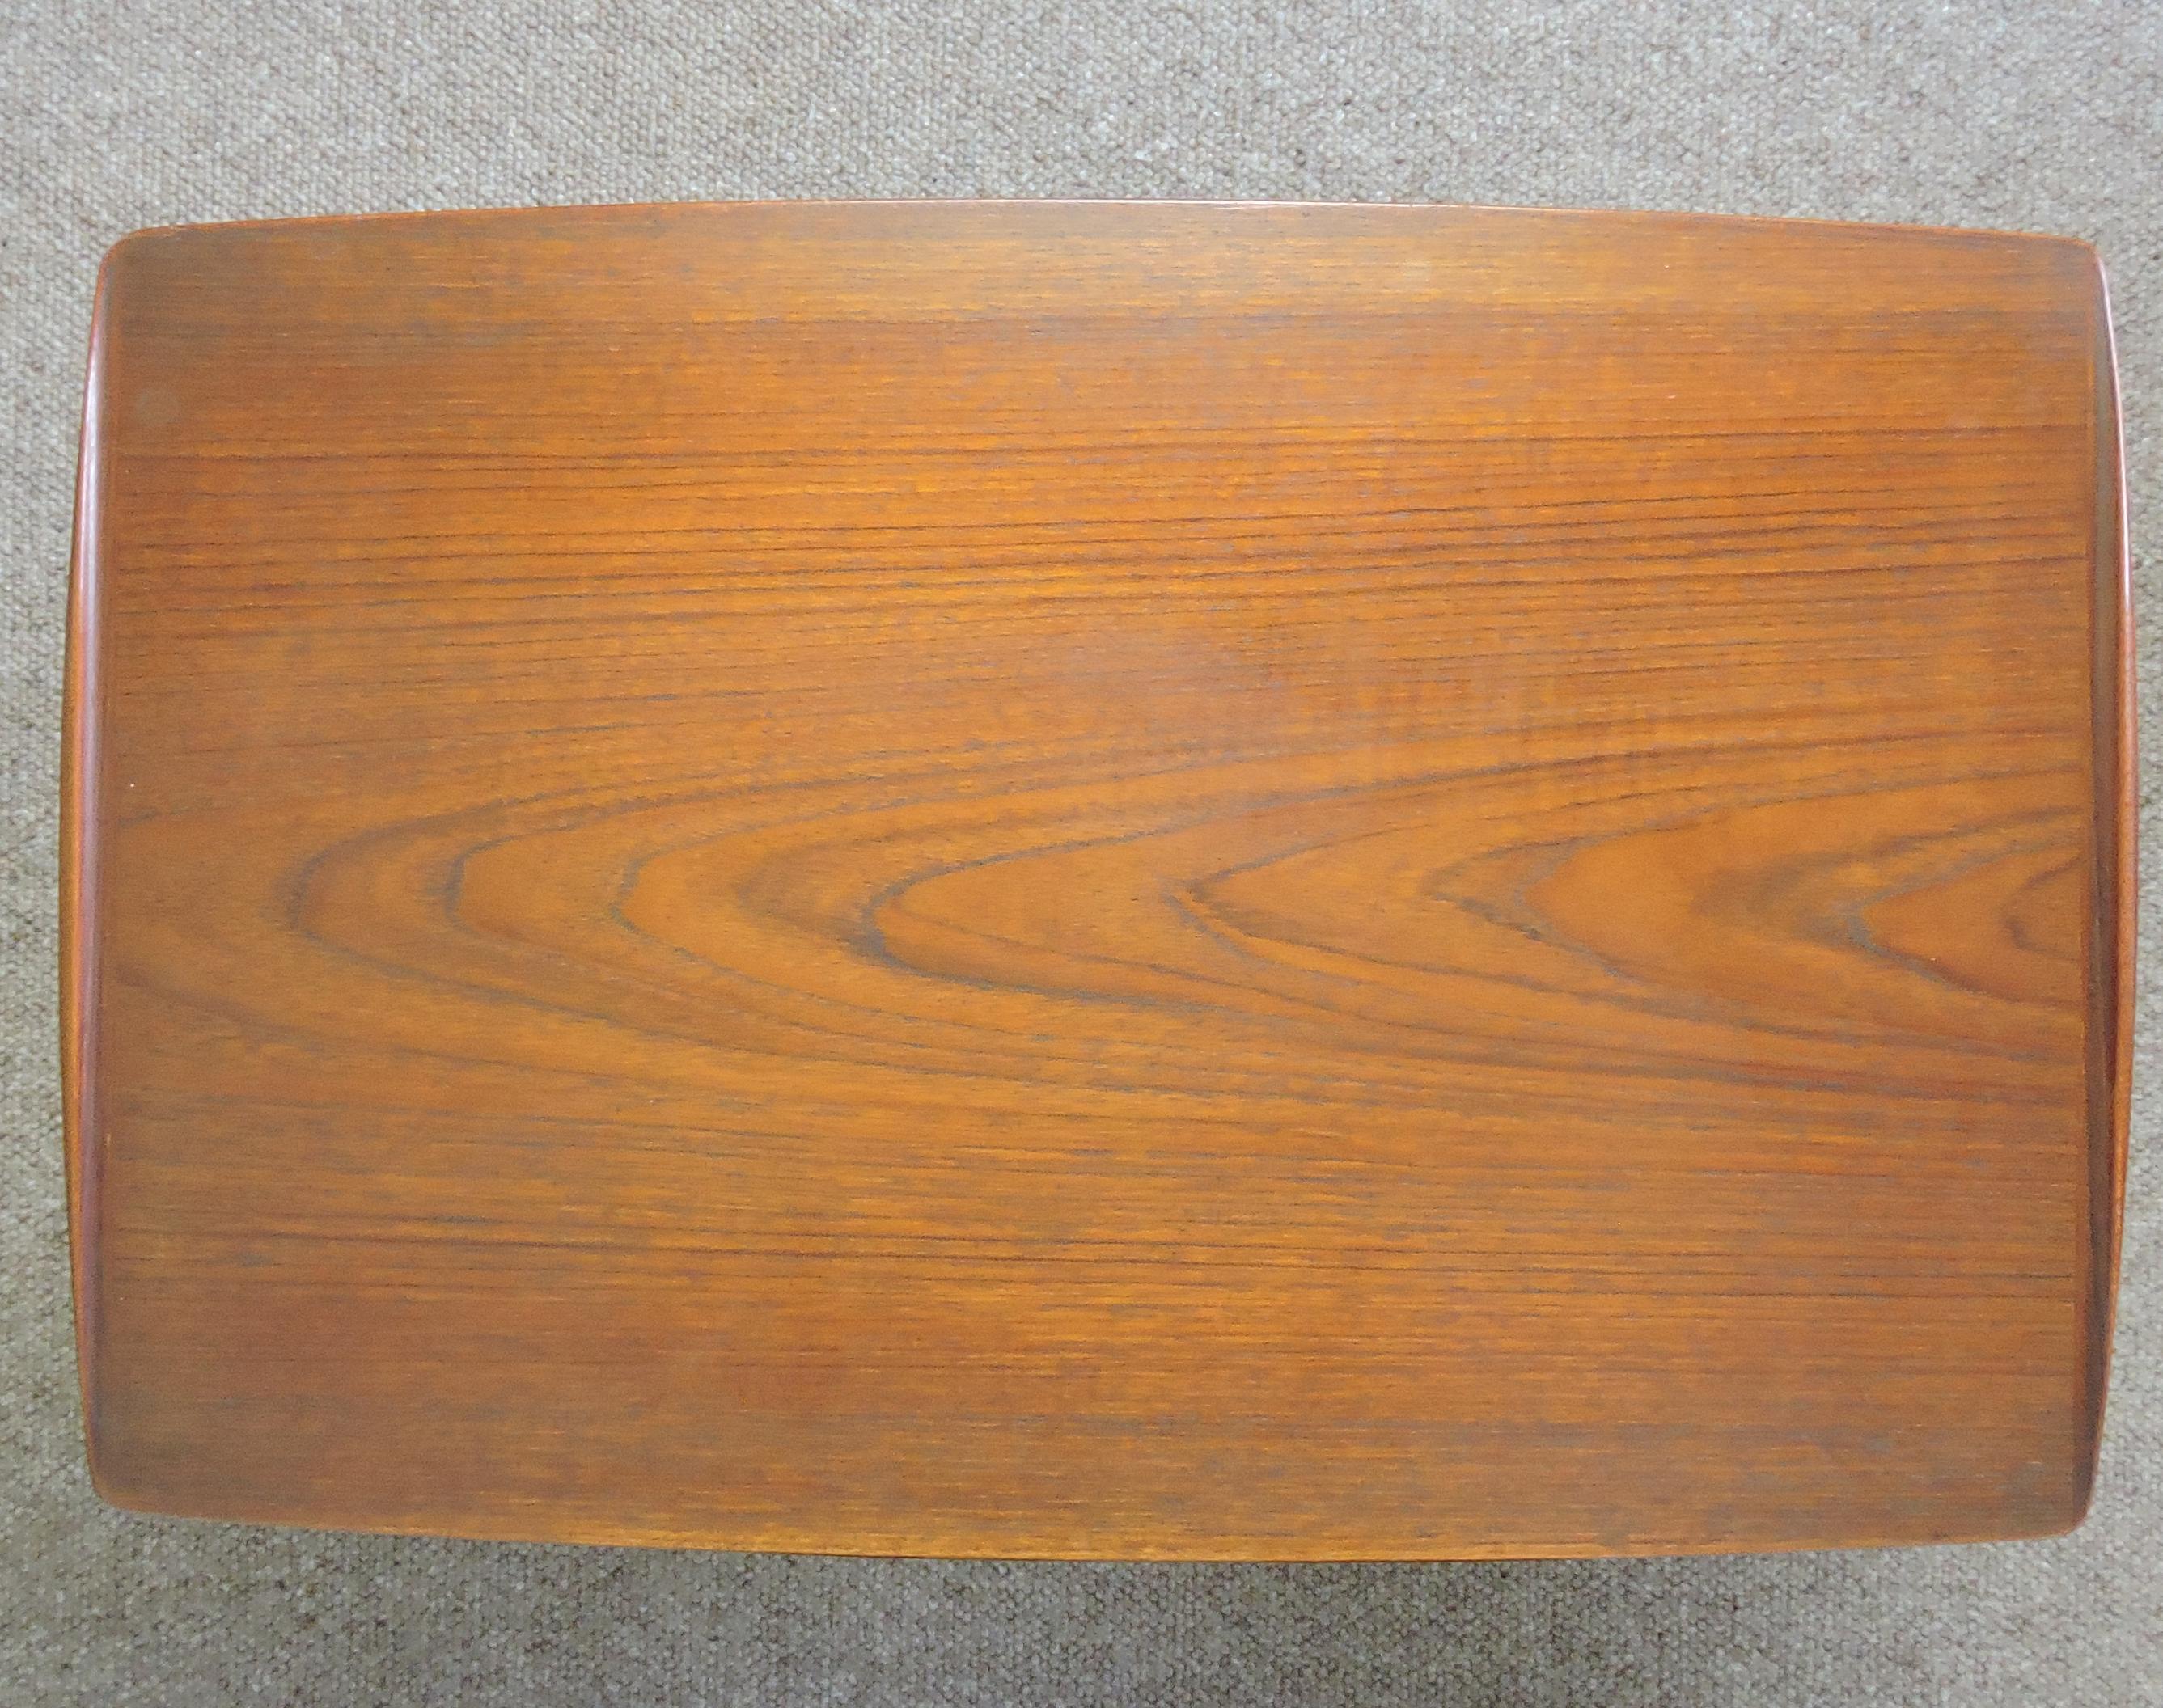 Midcentury Danish Teak and Cane Nesting Tables, 1950s For Sale 5